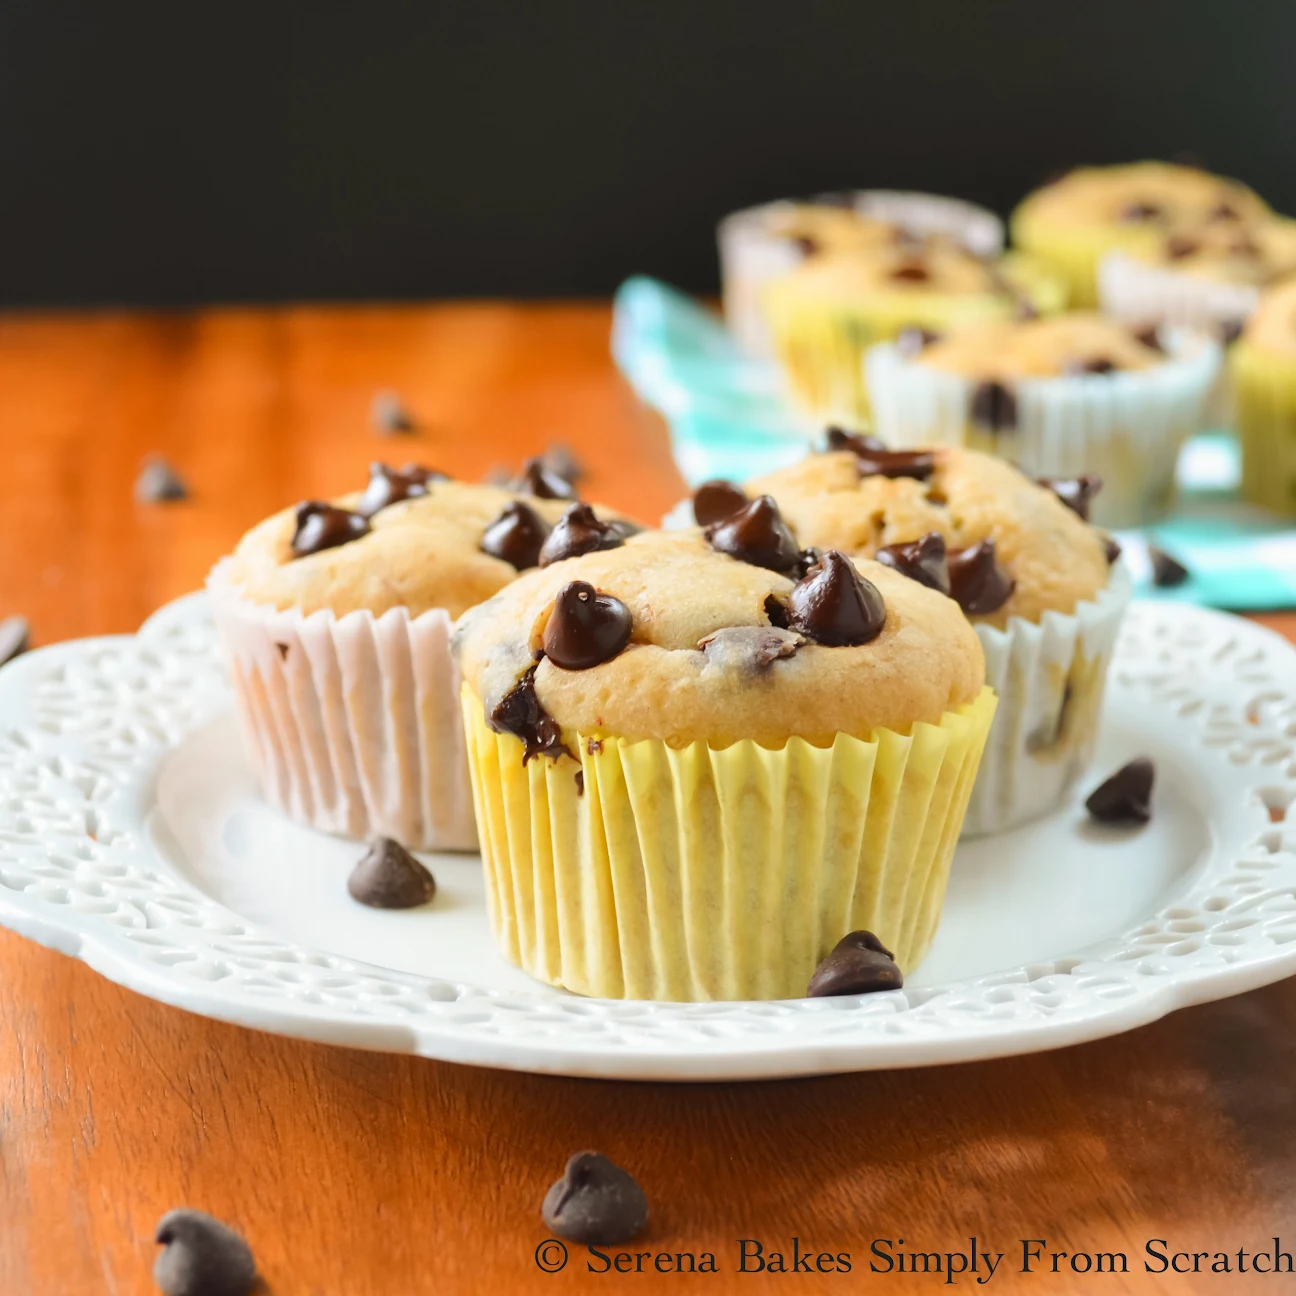 Skinny Banana Chocolate Chip Muffins an easy way to start the morning.